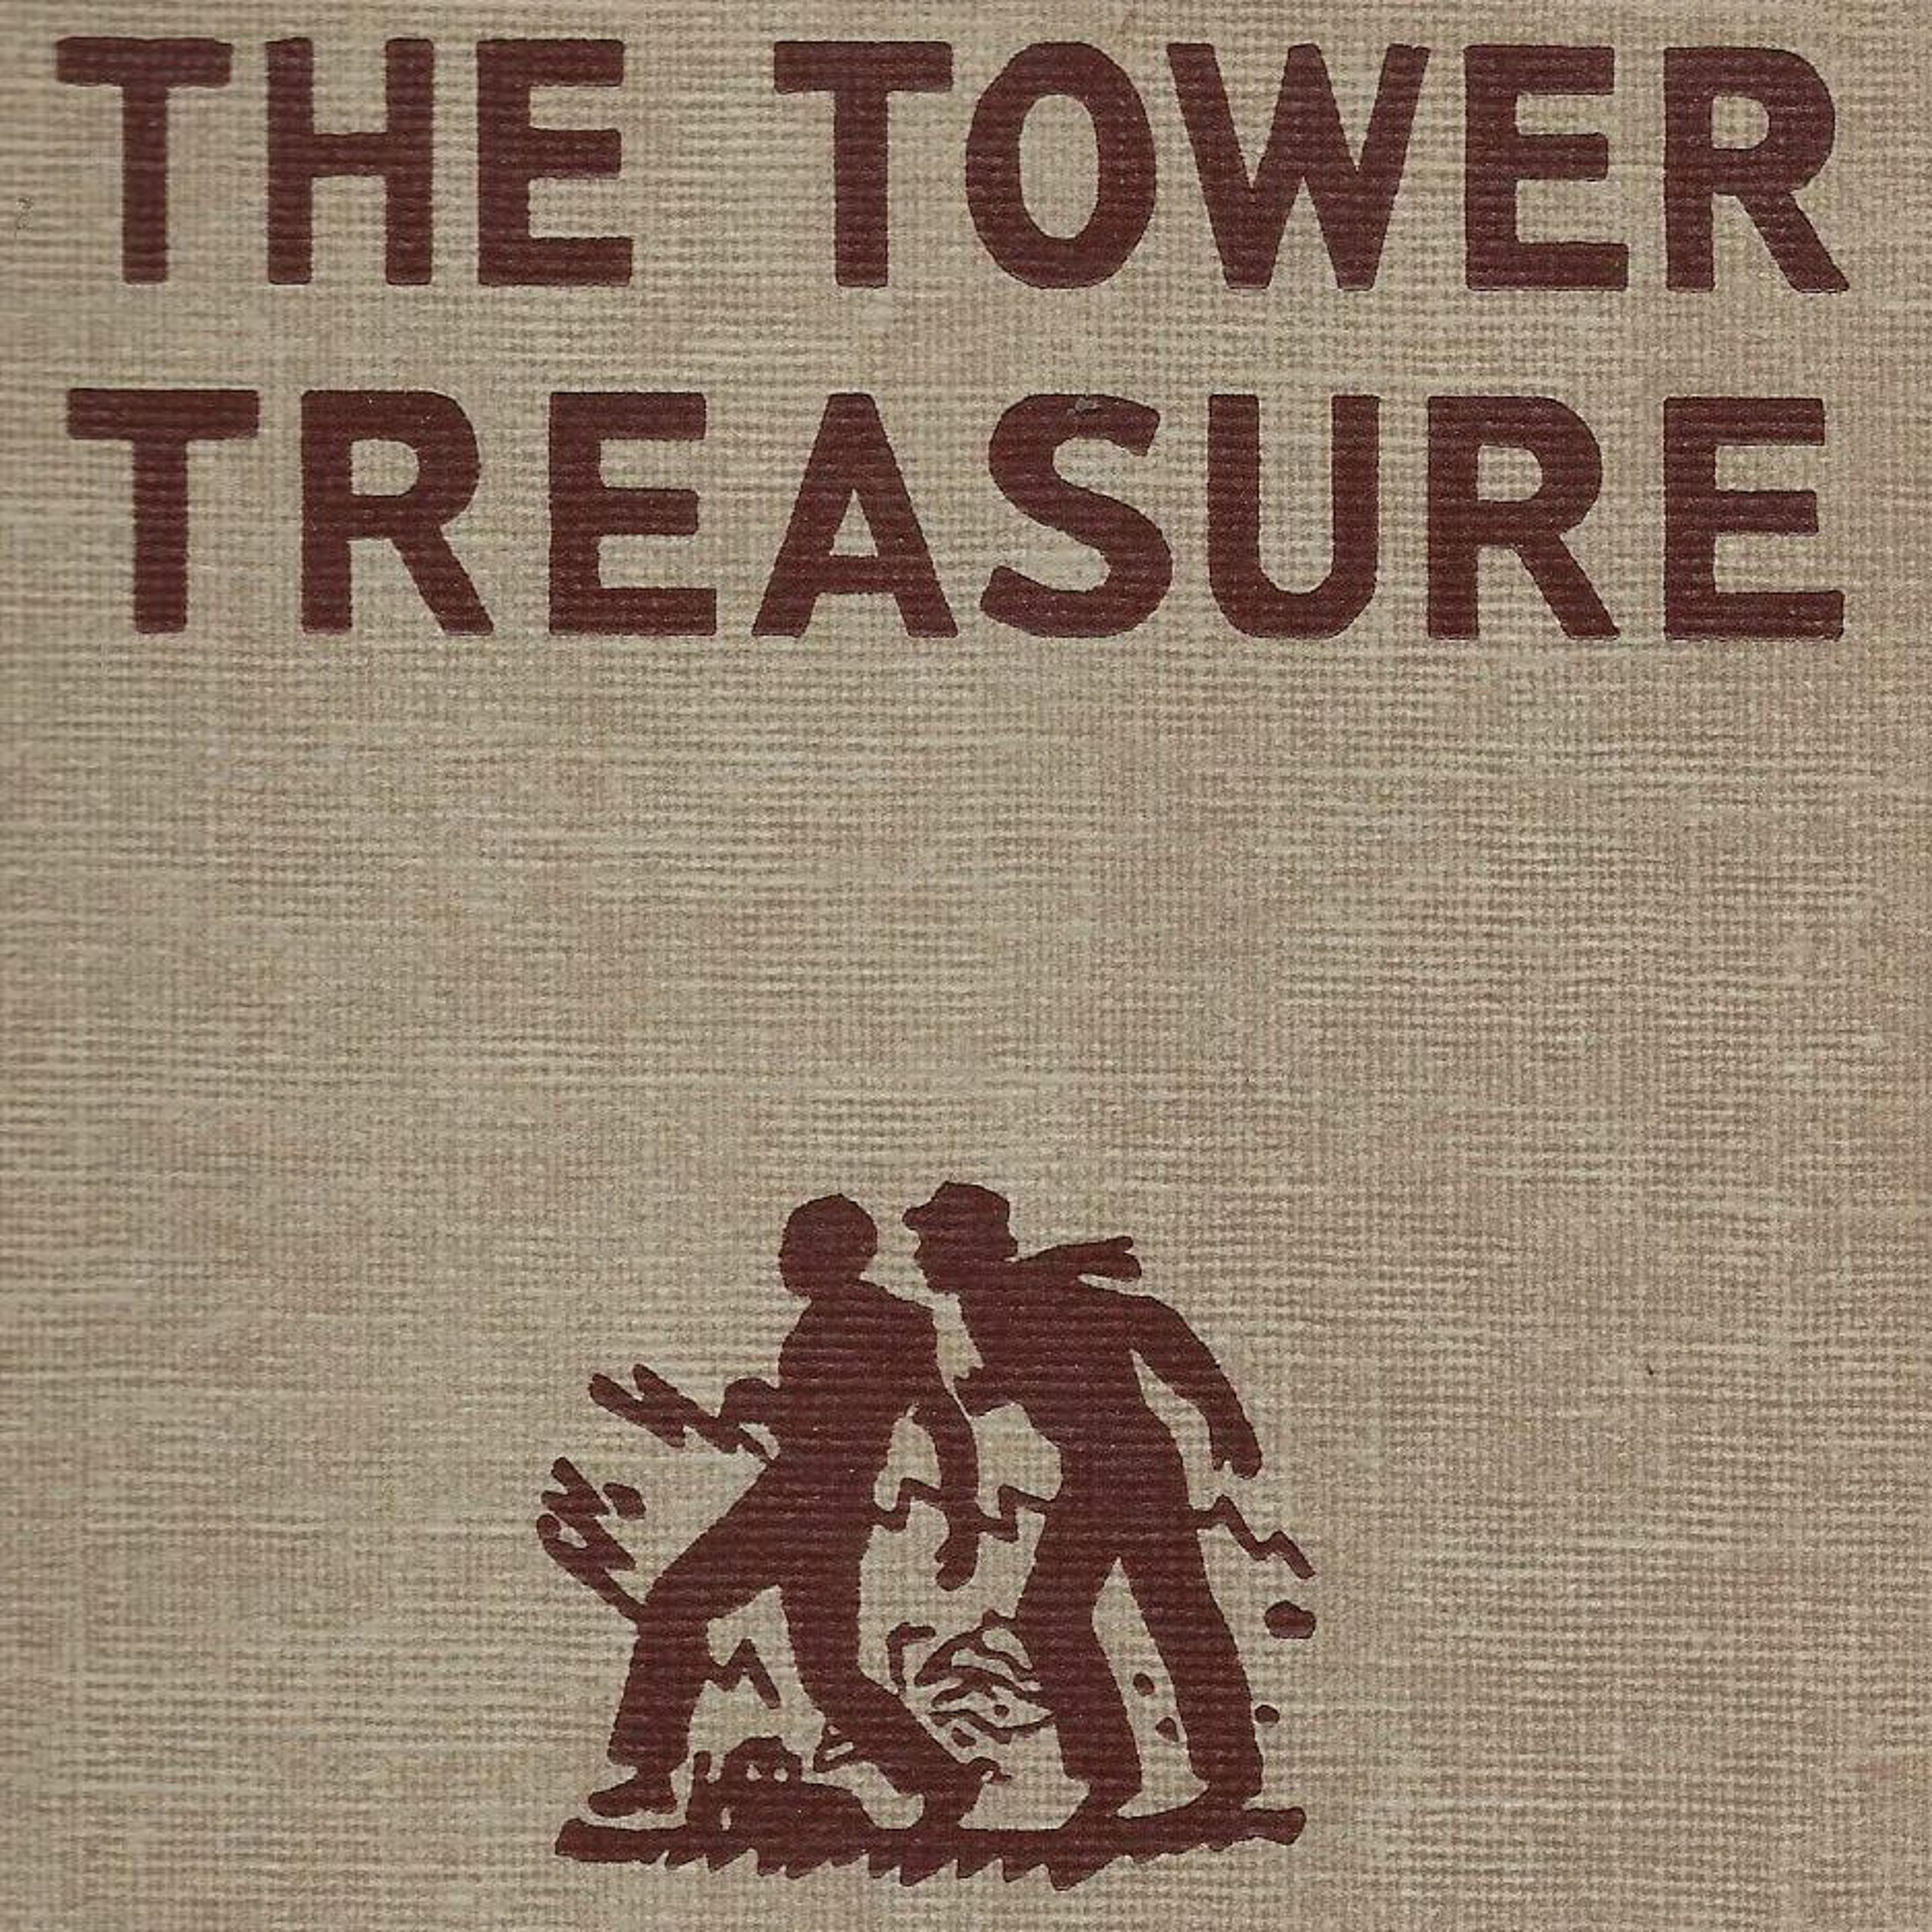 Chilling Suspense Presents: The Hardy Boys - The Tower Treasure